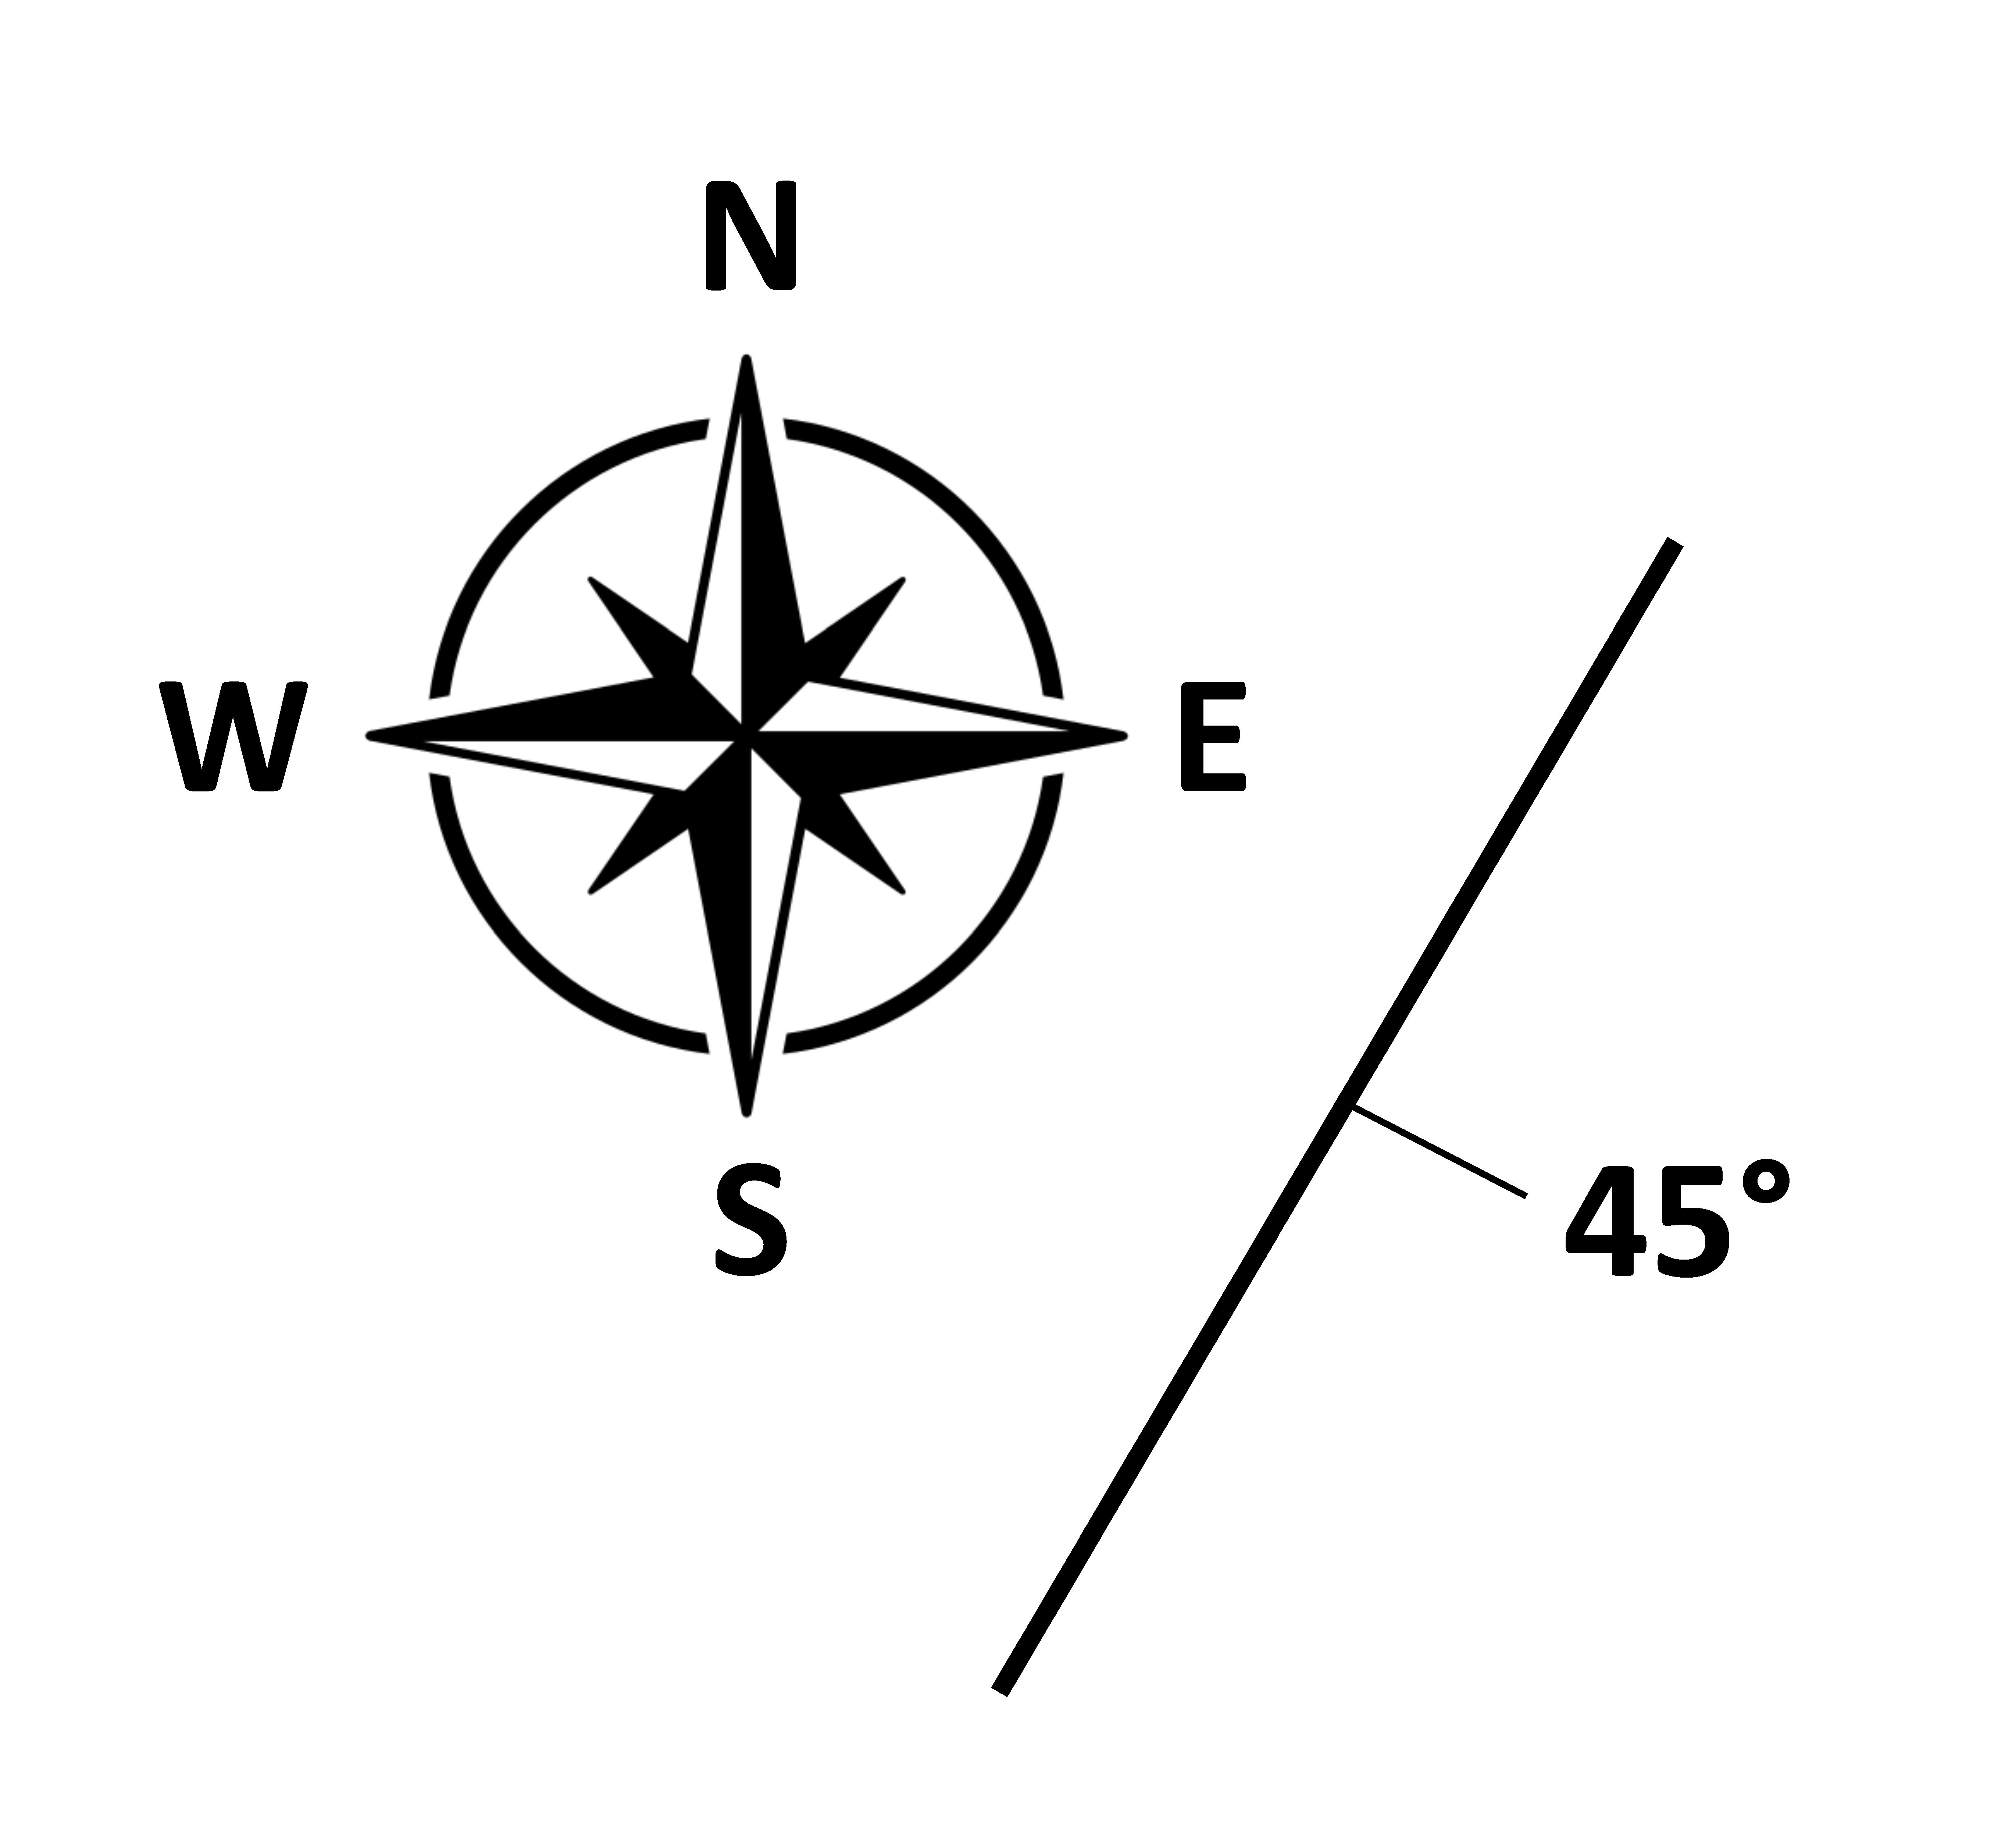 Strike and Dip symbol showing strike of N30E and dip of 45 to the SE.